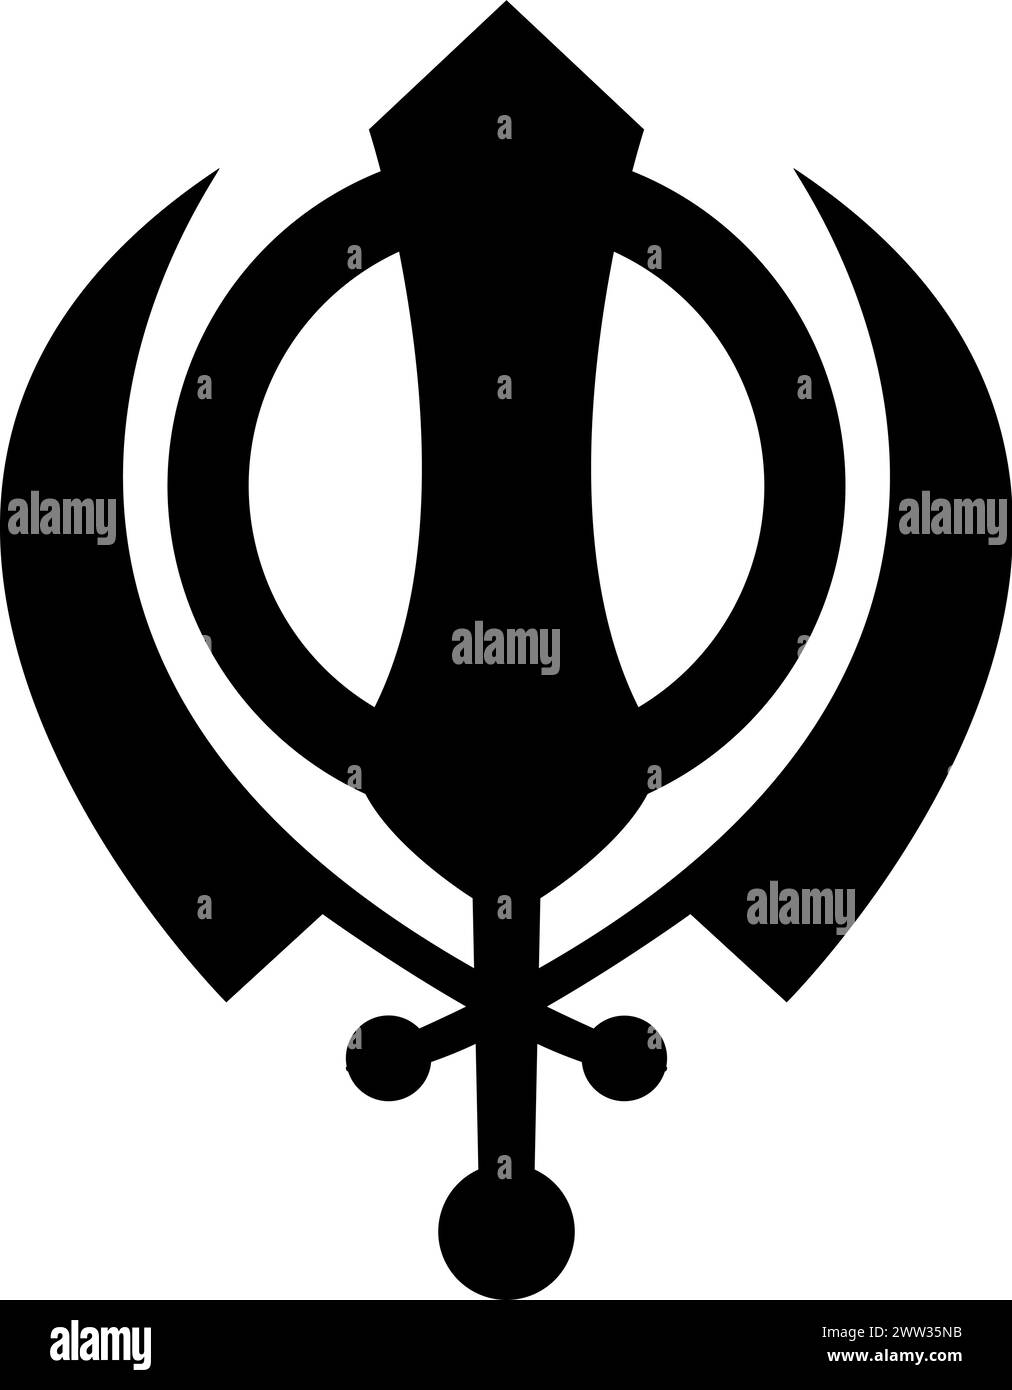 Shield sword mystical religious symbol. Spiritual weapon sign of traditional culture of worship and veneration. Simple black and white vector isolated Stock Vector